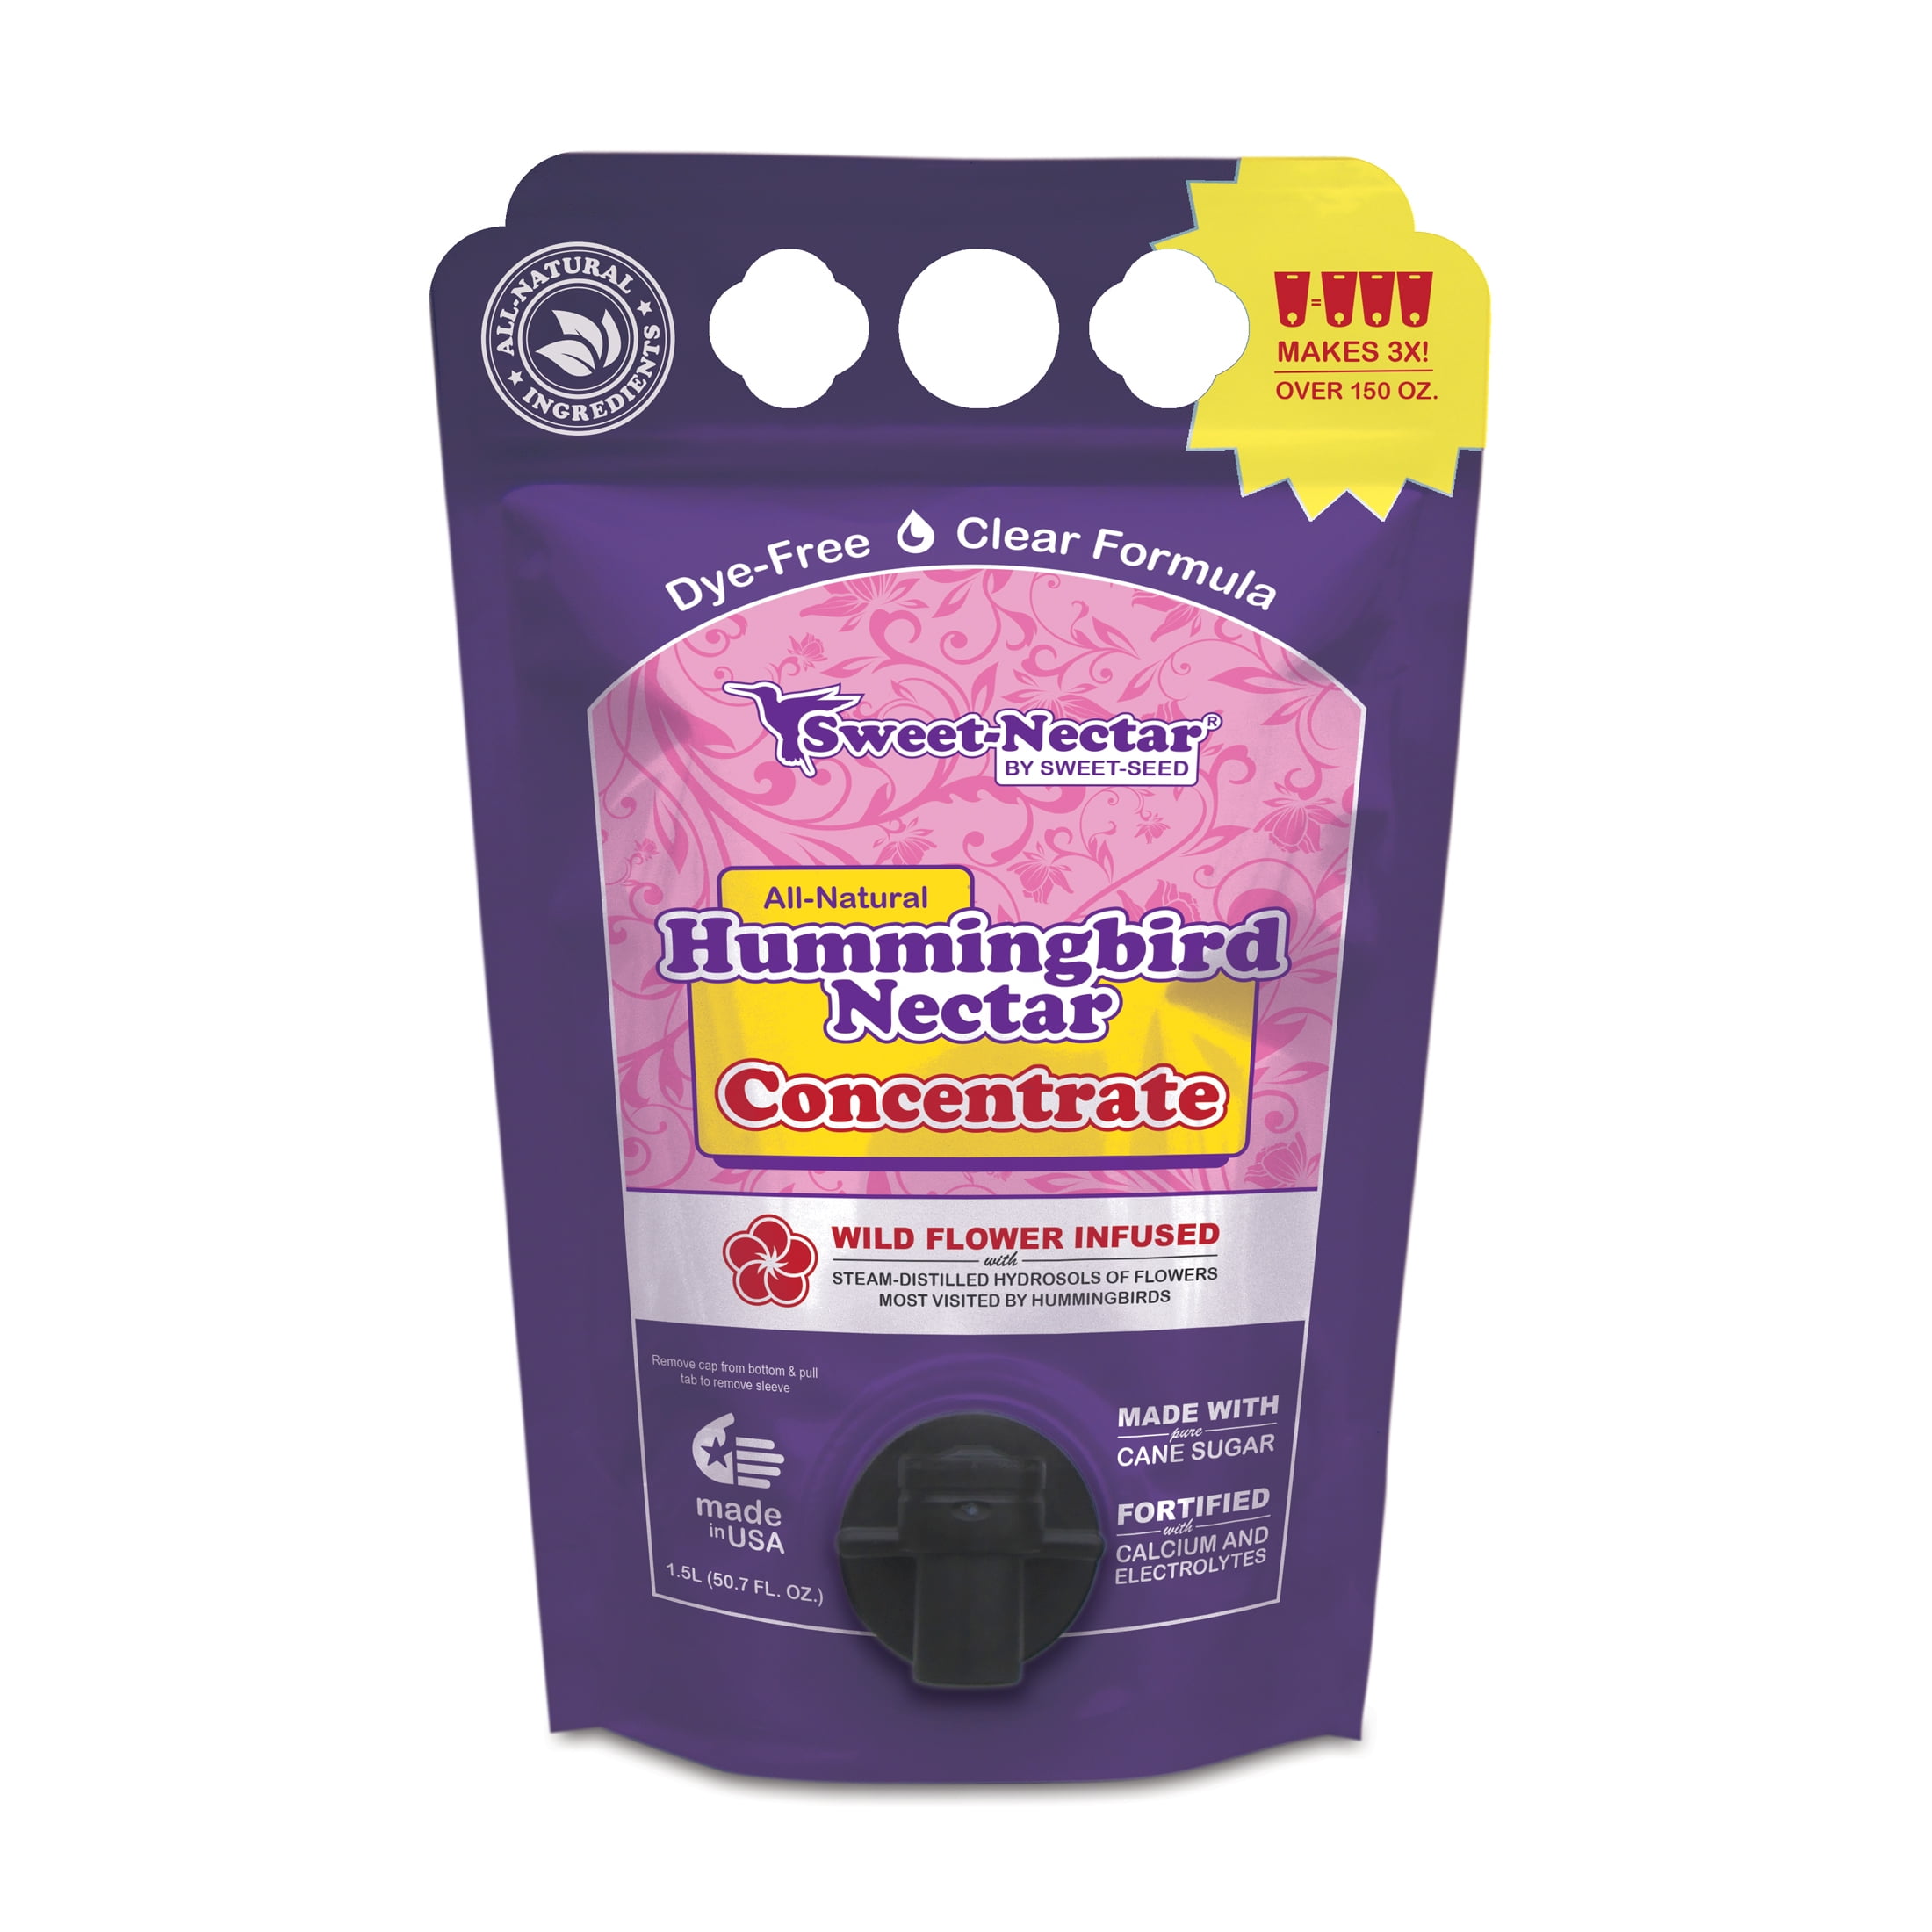 8000388 Hummingbird Nectar Concentrate For Sucrose, 1.5 Litre - Case Of 9